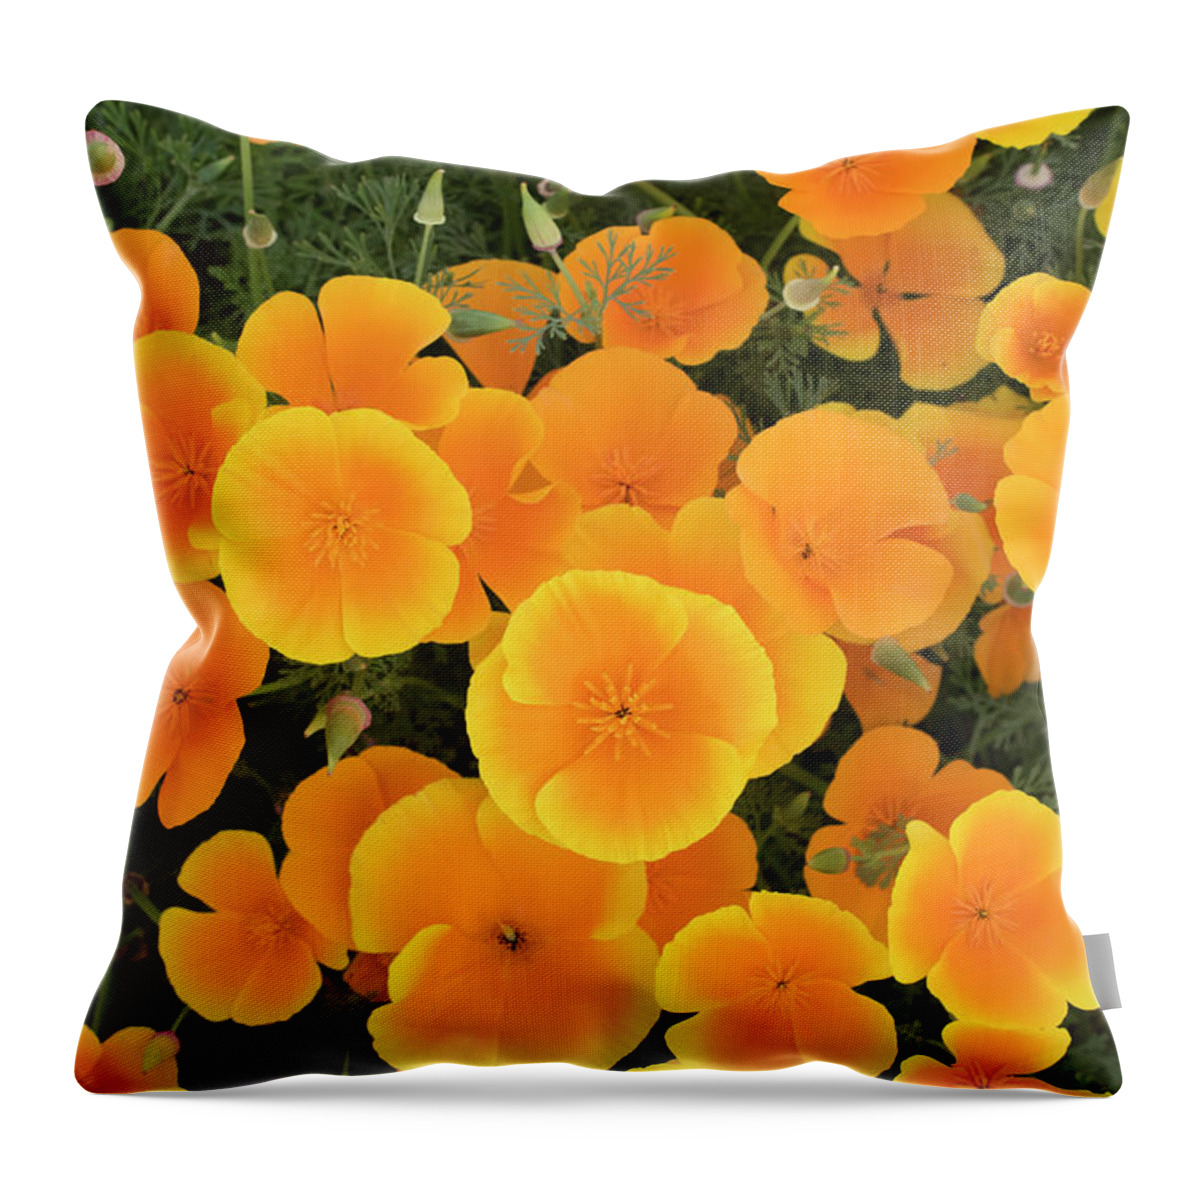 Eschscholzia Californica Throw Pillow featuring the photograph California Poppies by Tim Gainey